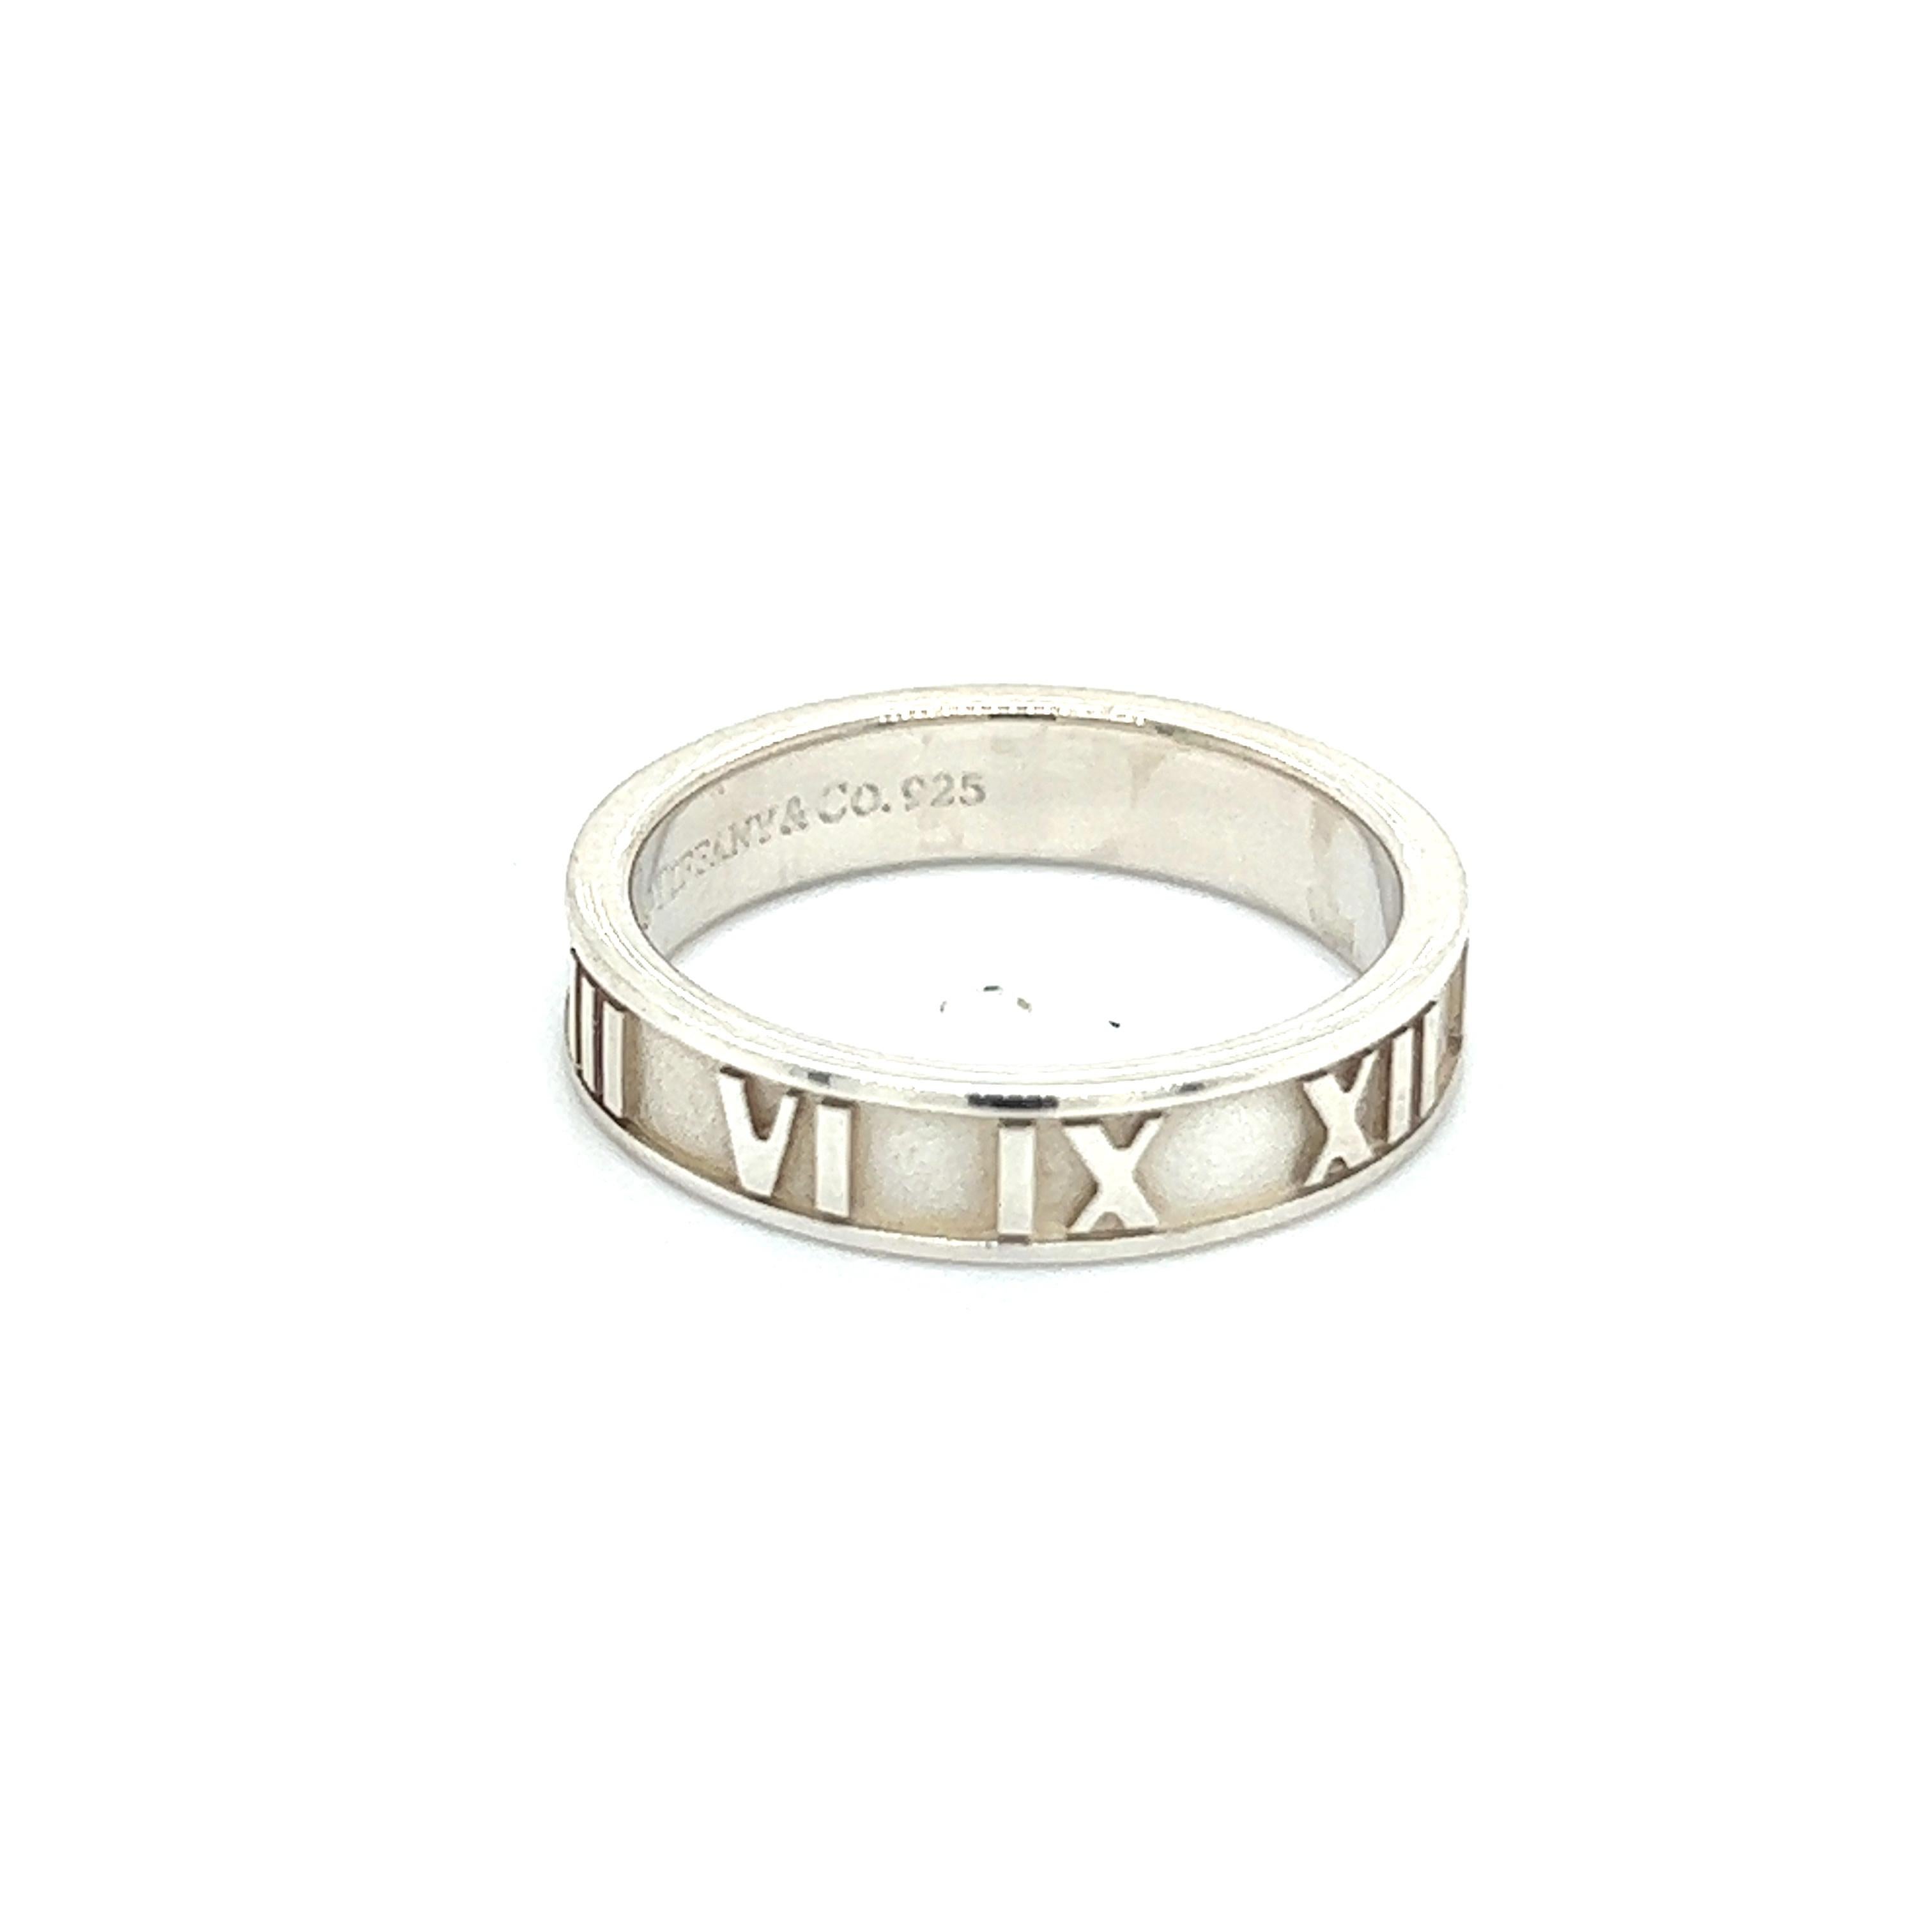 Authentic Tiffany & Co Estate Atlas Ring 5.5 Silver 4 mm TIF425

This elegant Authentic Tiffany & Co sterling silver ring is 5.5 inches in size and has a weight of 10 Grams.


TRUSTED SELLER SINCE 2002

DETAILS
Ring Size: 5.5
Height: 4 mm
Weight: 10